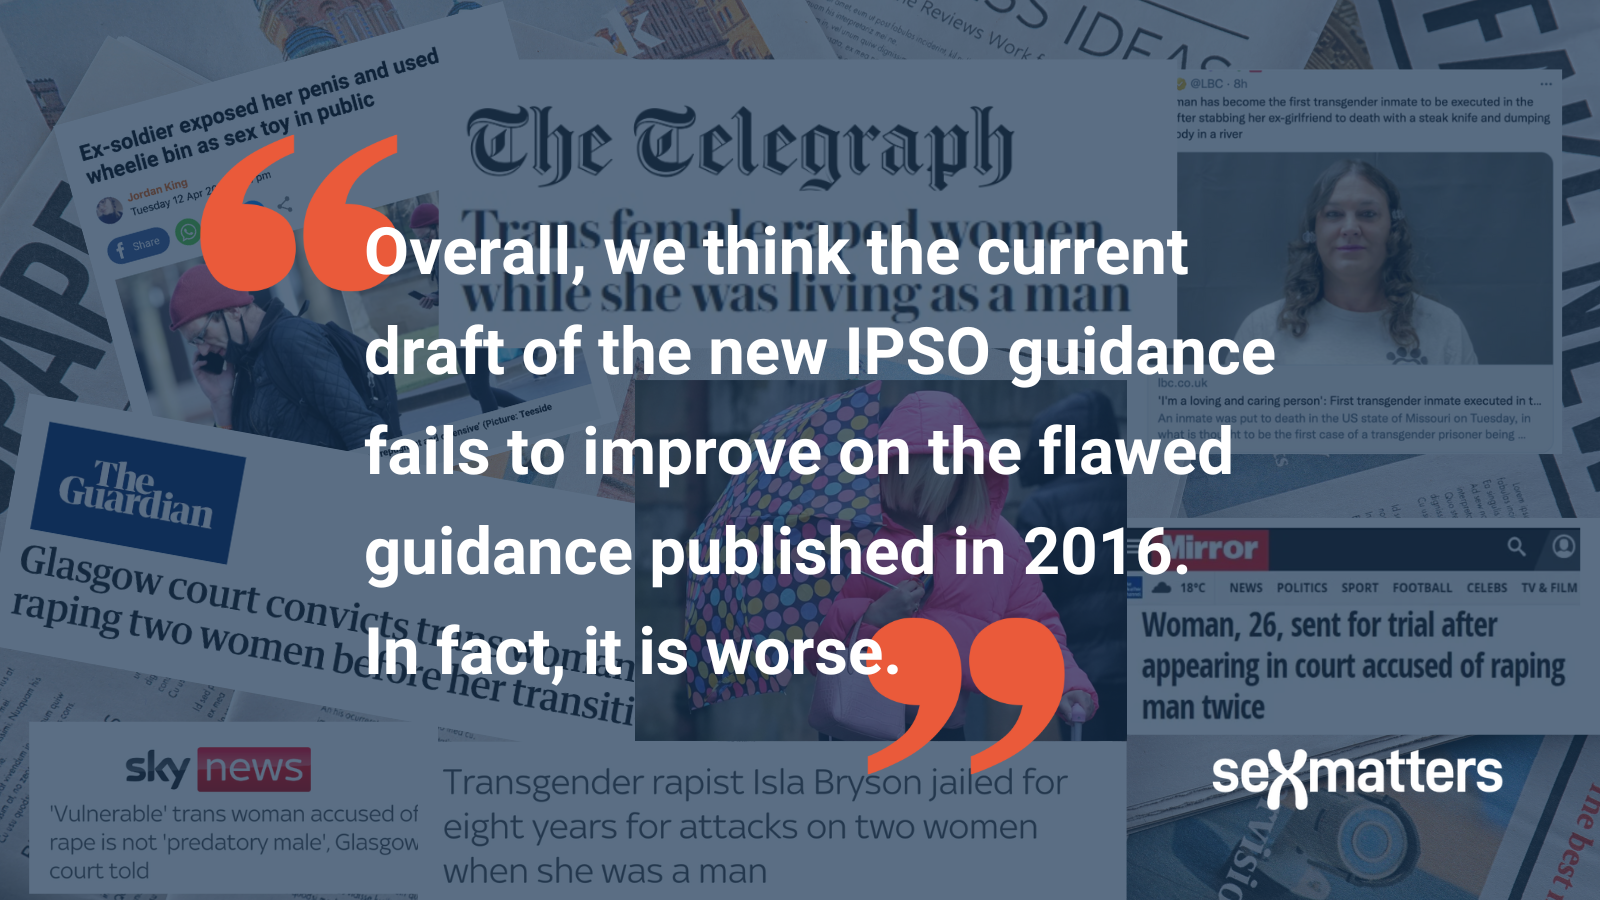 Overall, we think the current draft of the new IPSO guidance fails to improve on the flawed guidance published in 2016. In fact, it is worse.